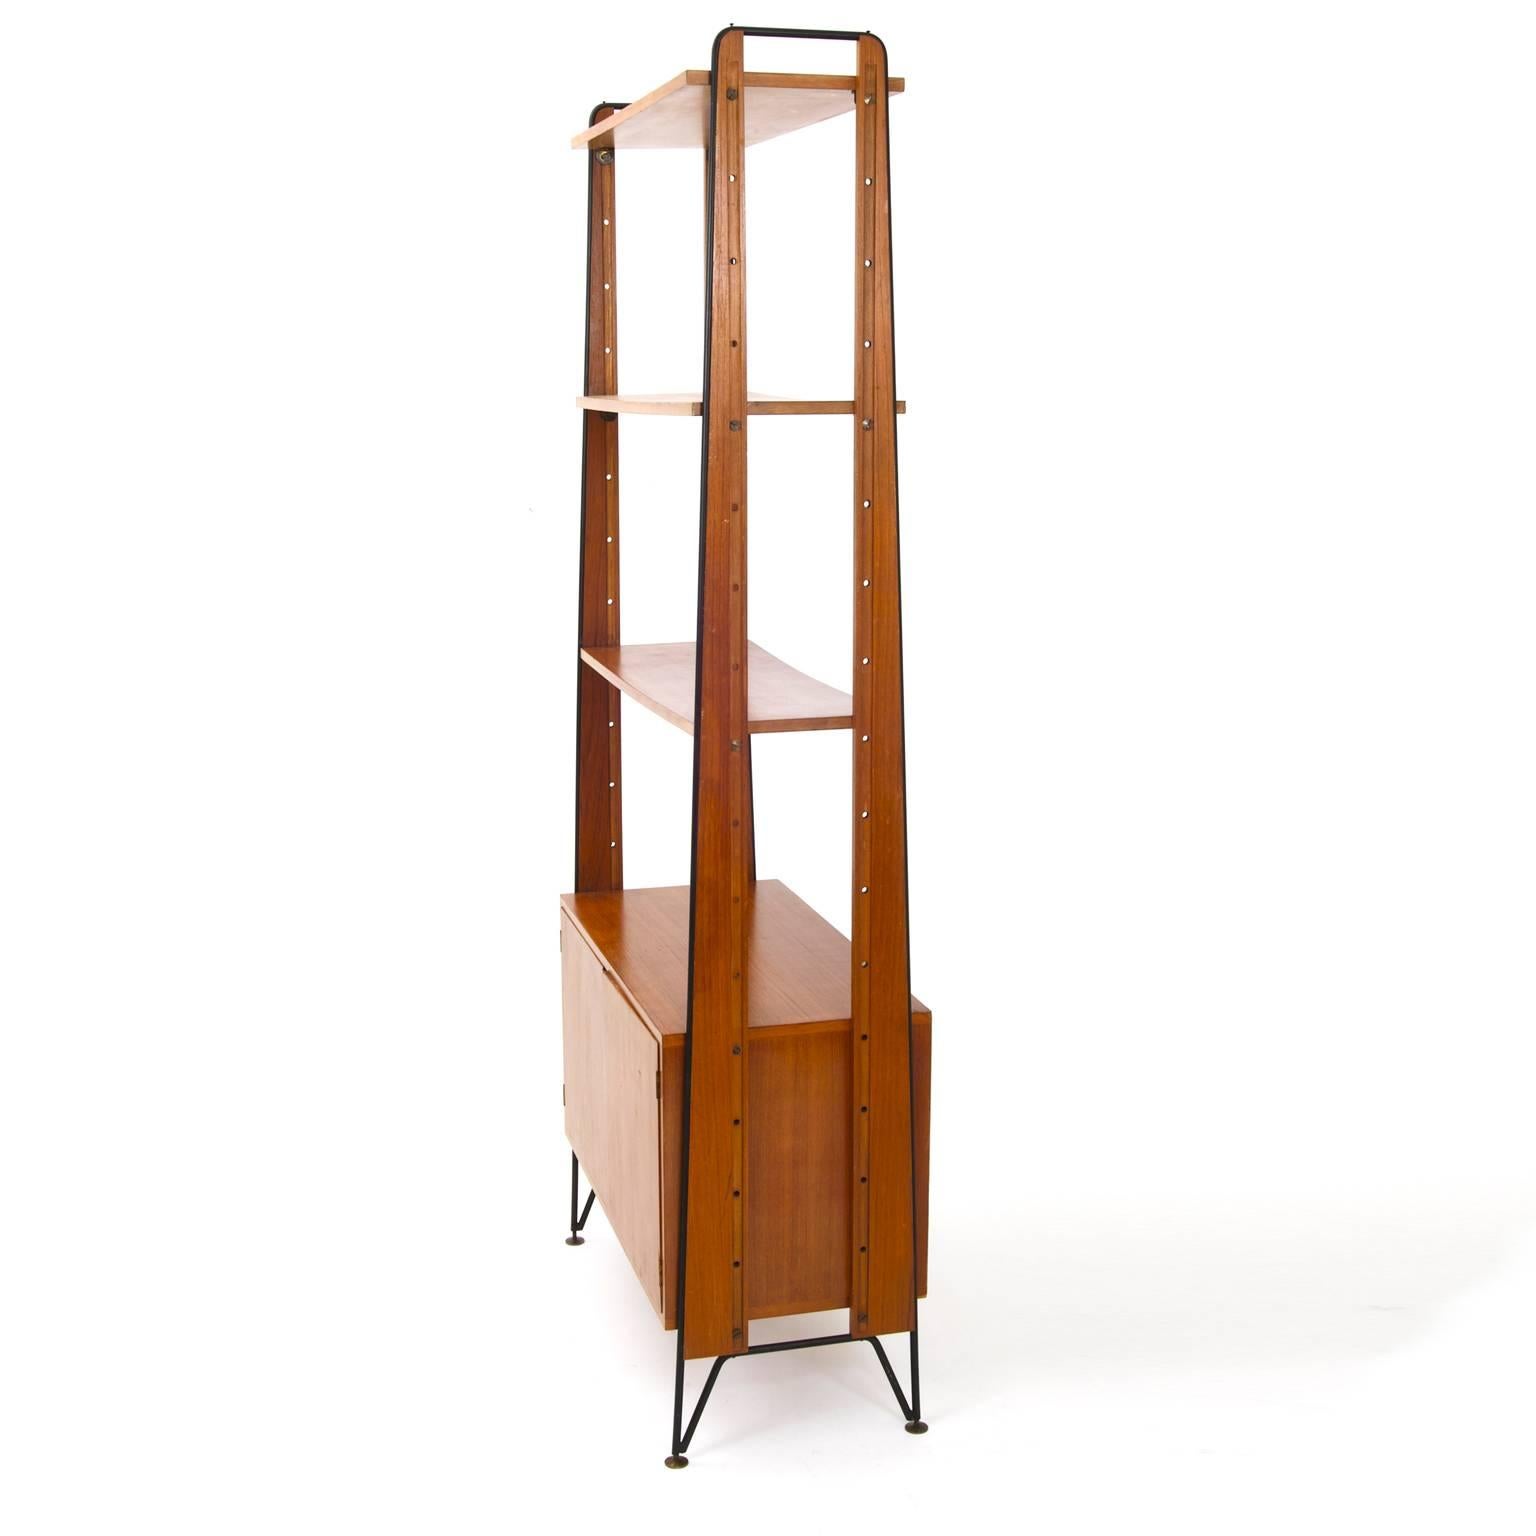 An open shelf system on metal strutting with round brass feet. The piece has three adjustable shelves and a cabinet with two doors. On the inside is a stamp from the company Mobilifico Cicchetti from Genua.